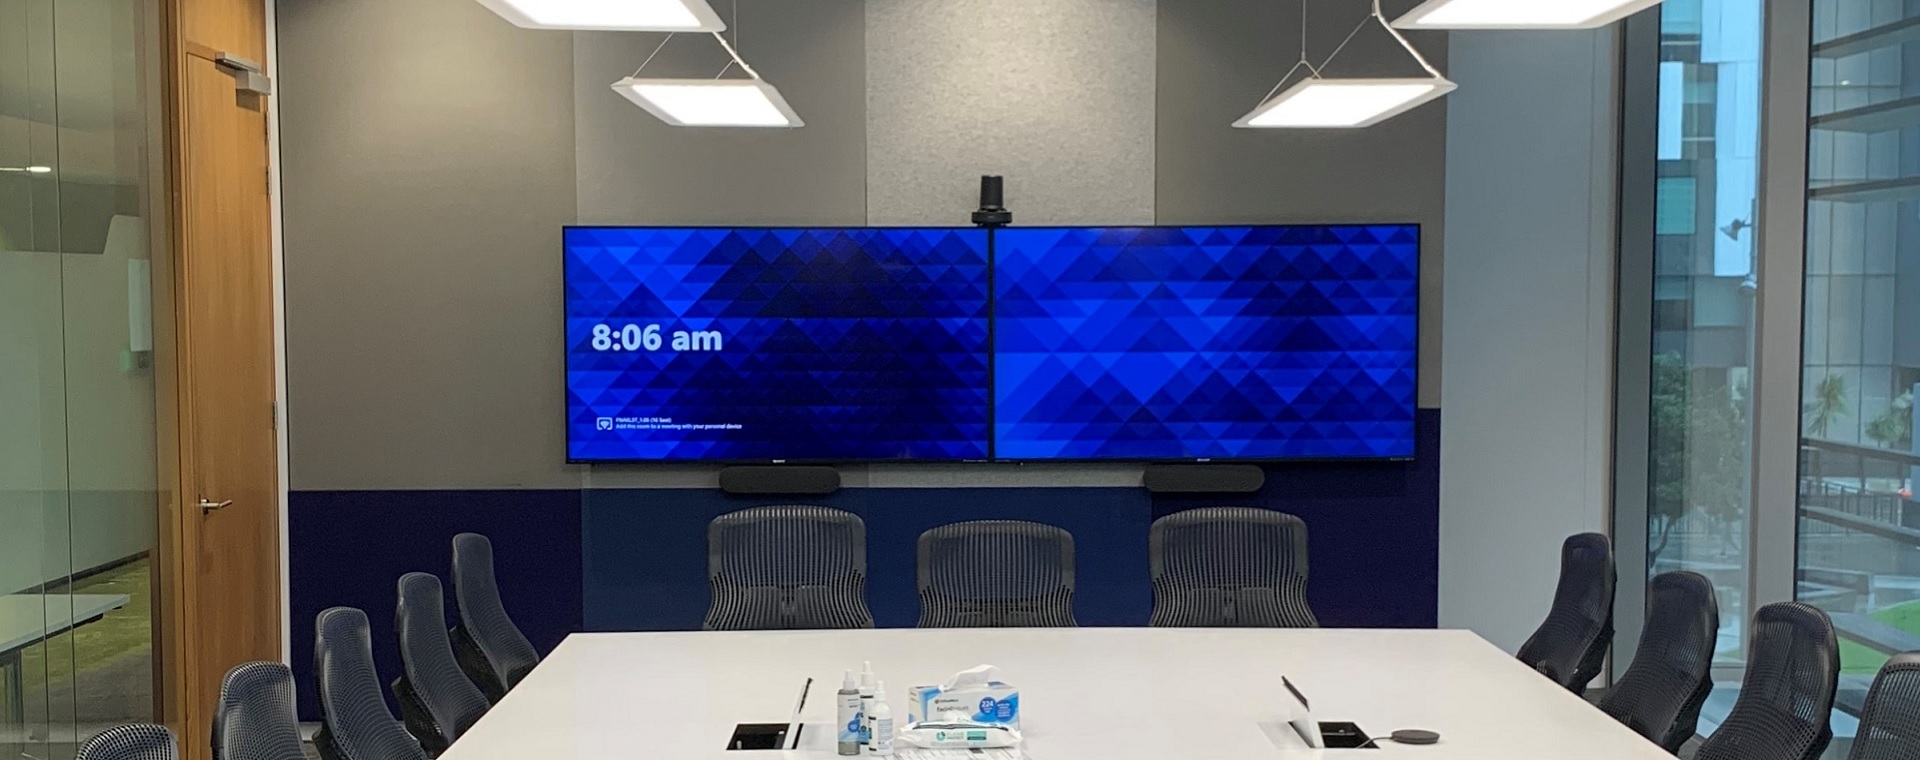 Fonterra meeting room with 2 large format display panels and connections for bring you own device